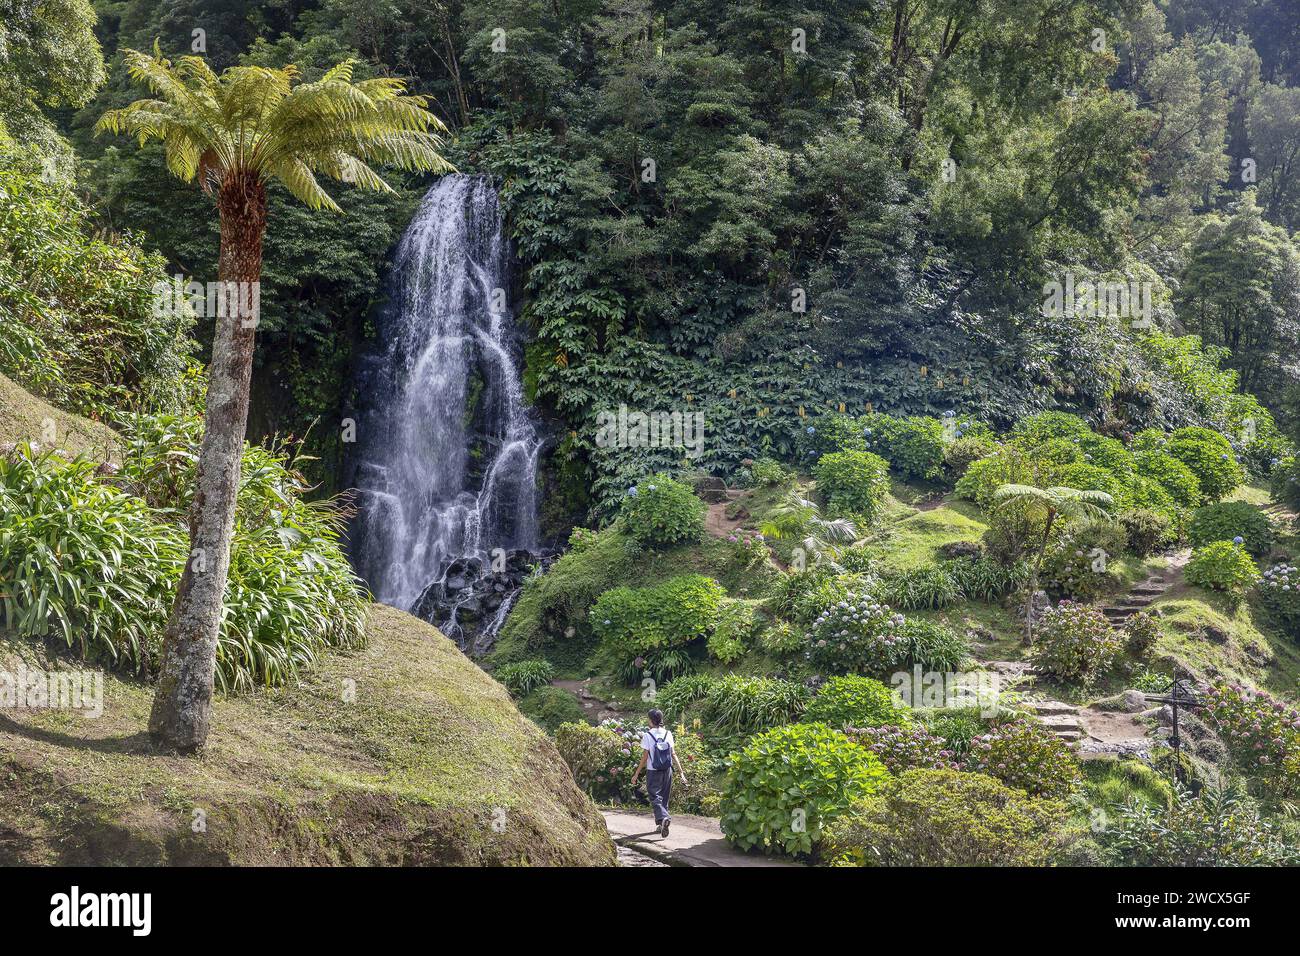 Portugal, Azores archipelago, Sao Miguel island, Parque Ribeira dos Caldeiroes, young woman walking on a path in the middle of a park with exuberant vegetation where a waterfall flows Stock Photo